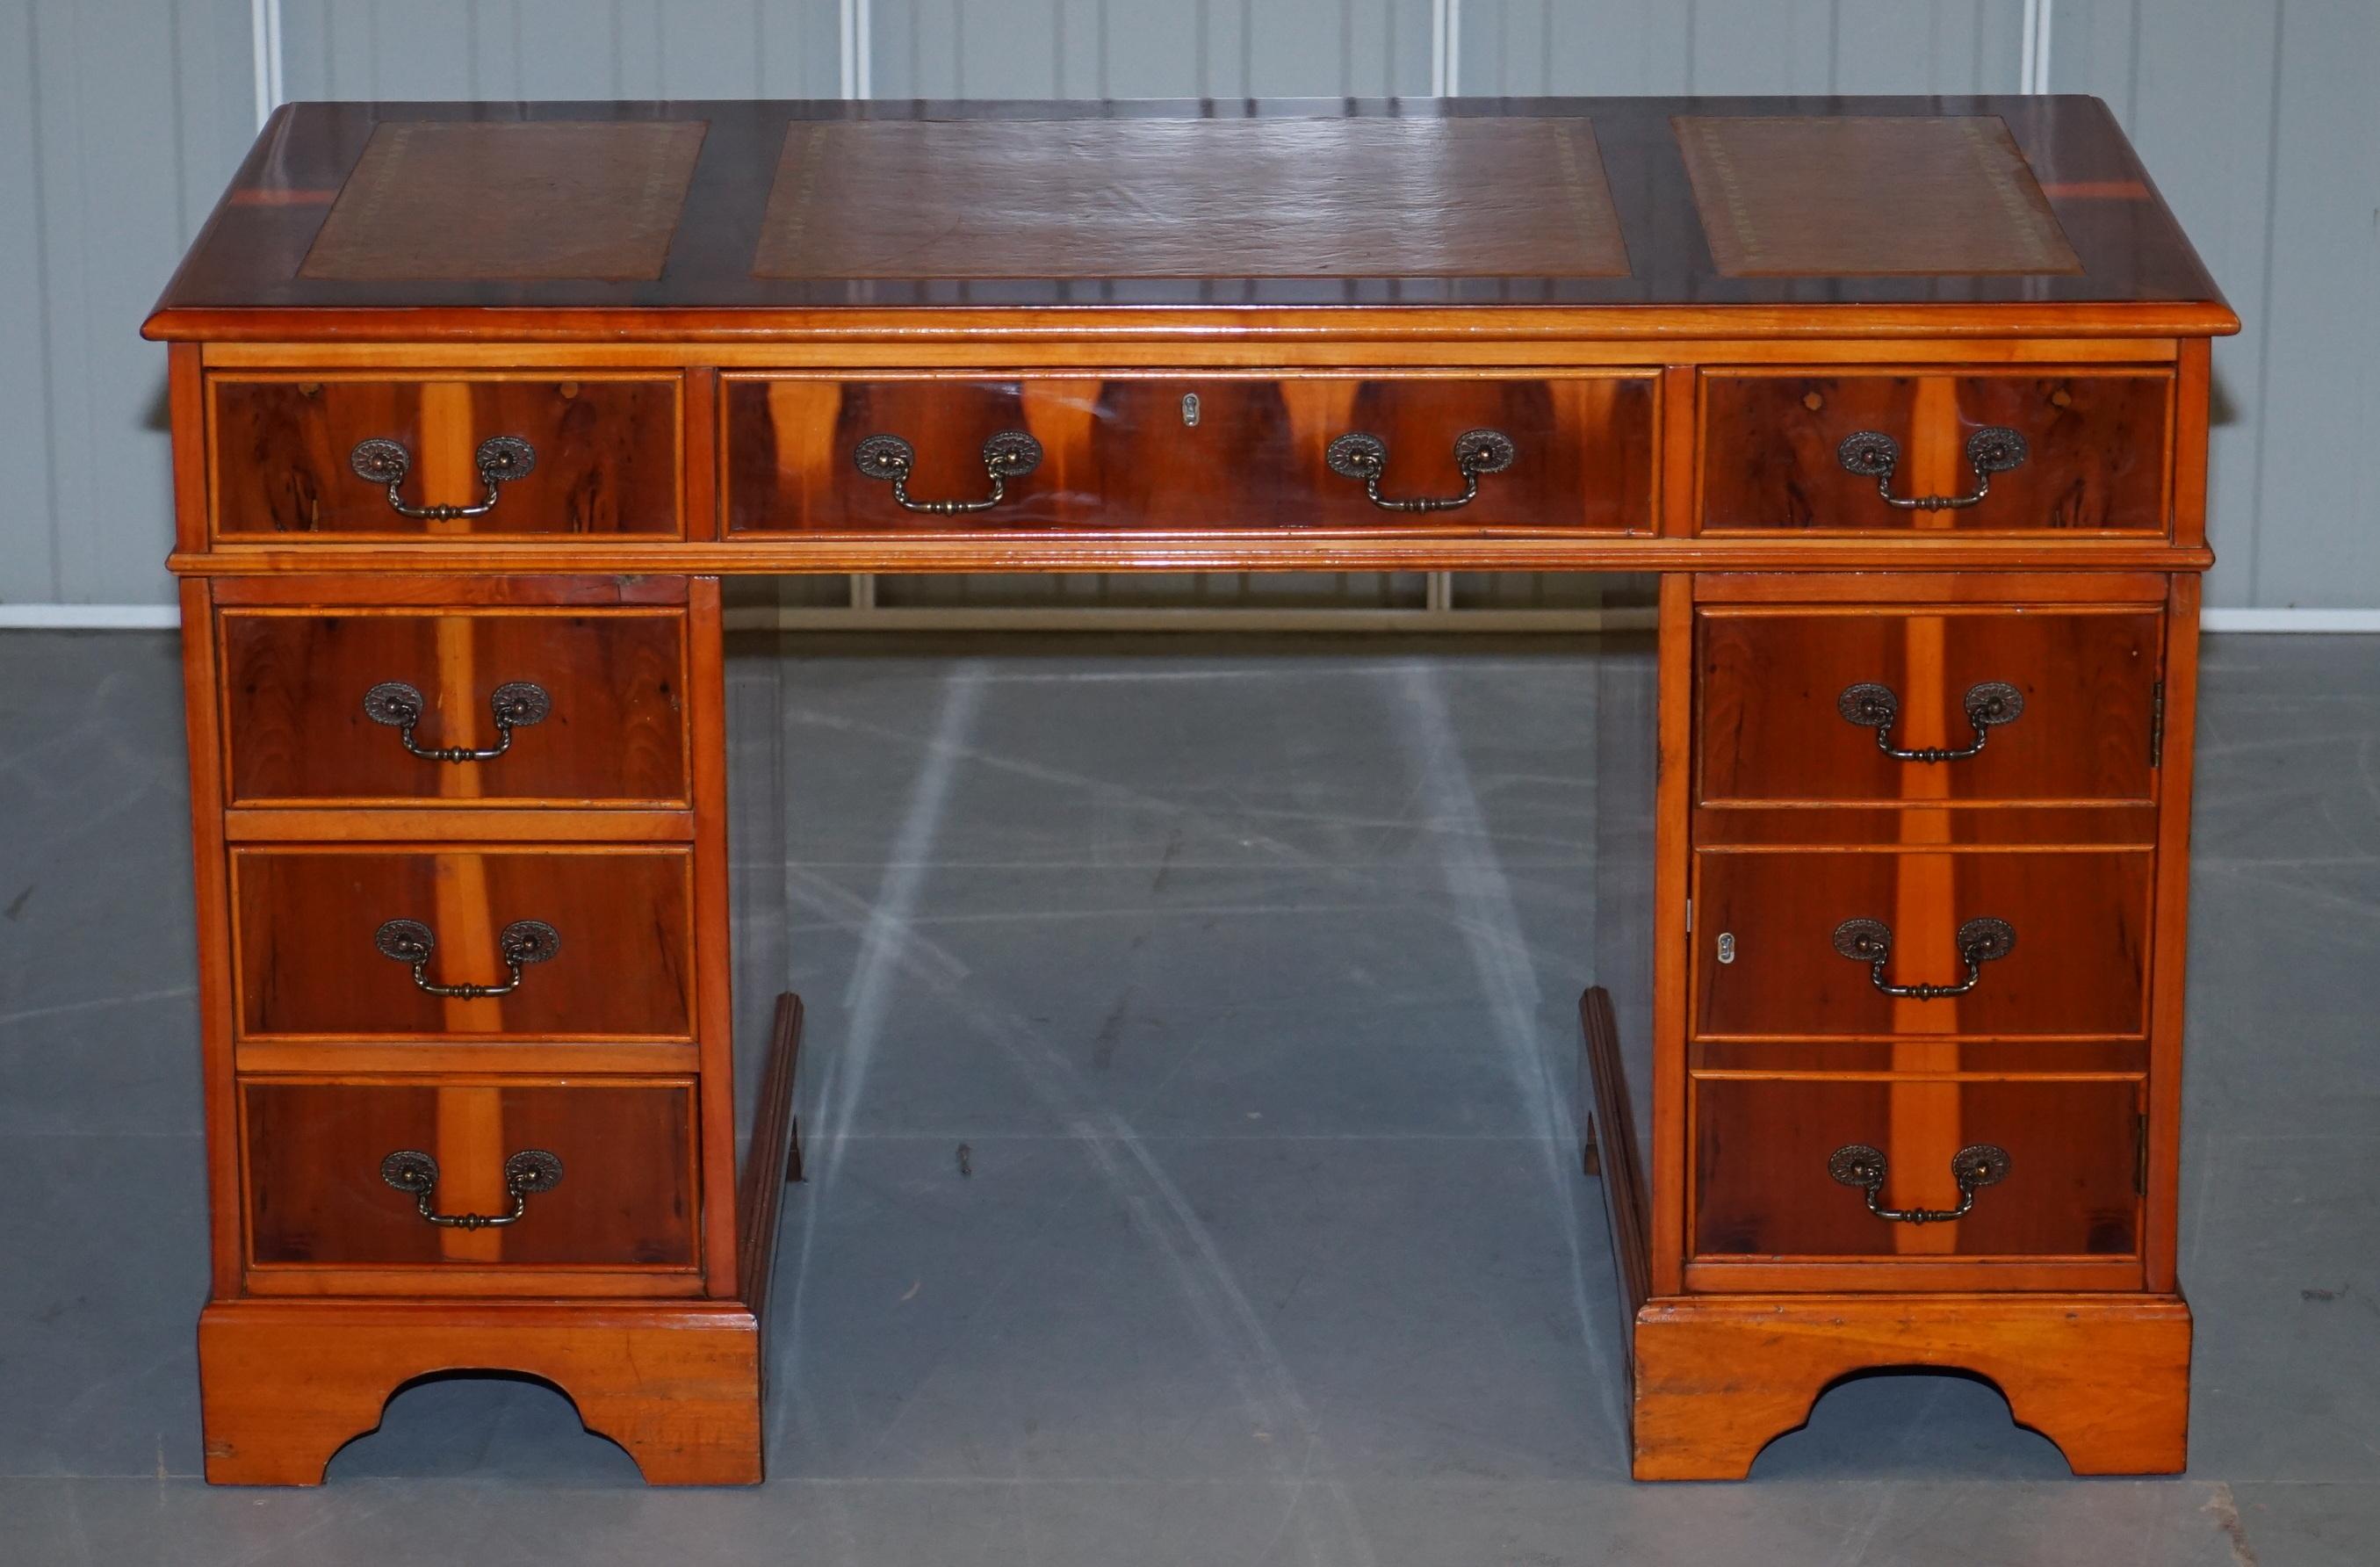 We are delighted to offer for sale this lovely vintage Flamed & Burr Yew wood twin pedestal partner desk with slip panelled leather writing surface

This is one of the most decorative types of these desks I’ve ever seen or had in stock, the timber